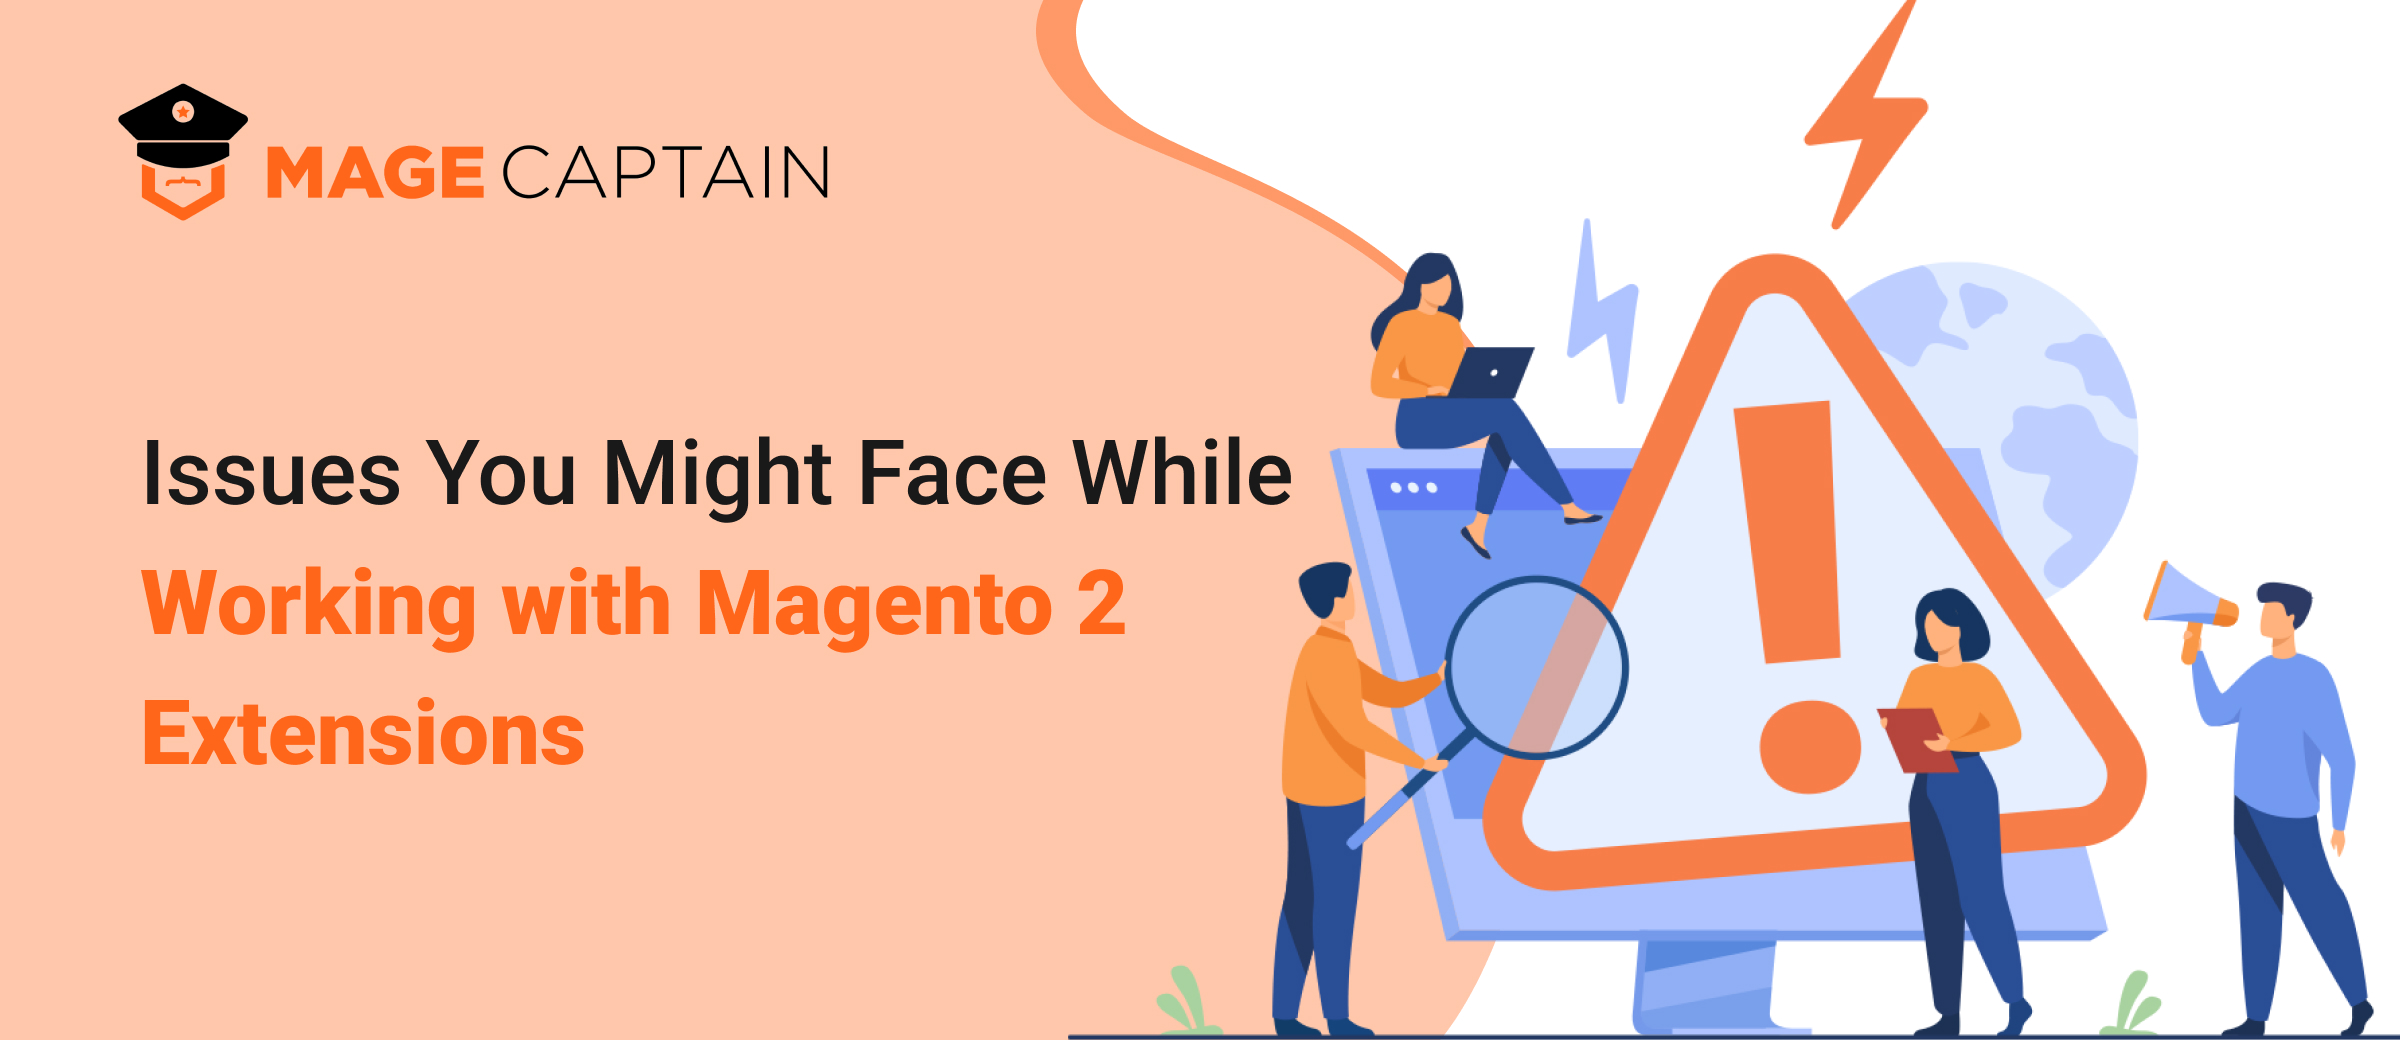 Issues You Might Face While Working With Magento 2 Extensions